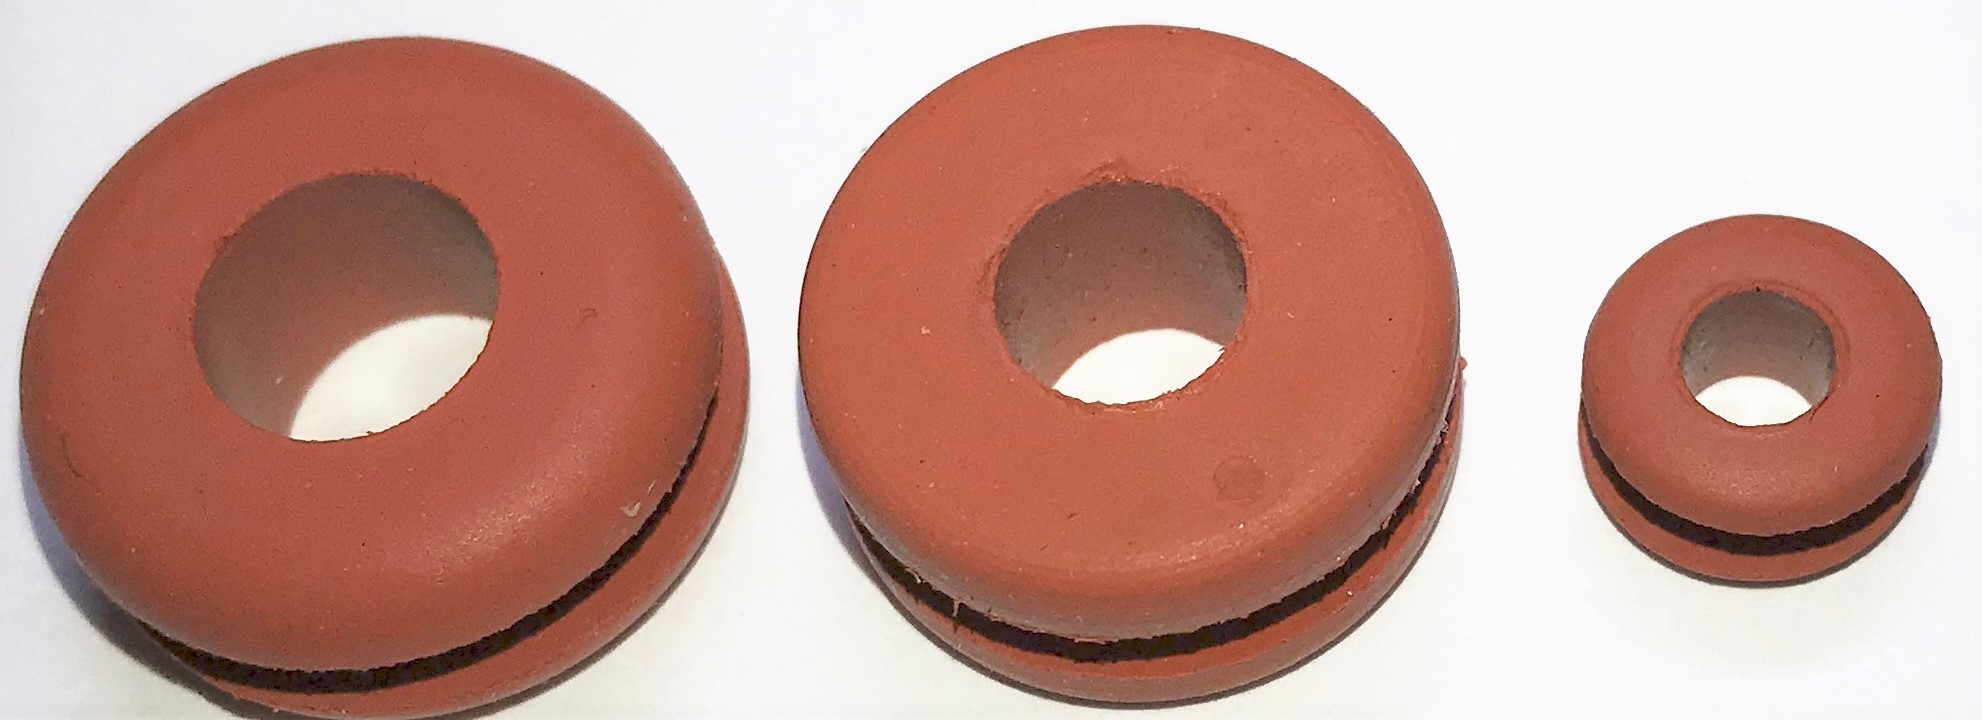 1 3/4" ID x 2 3/8 OD 2" Firewall Rubber Grommets for 1/8" panel